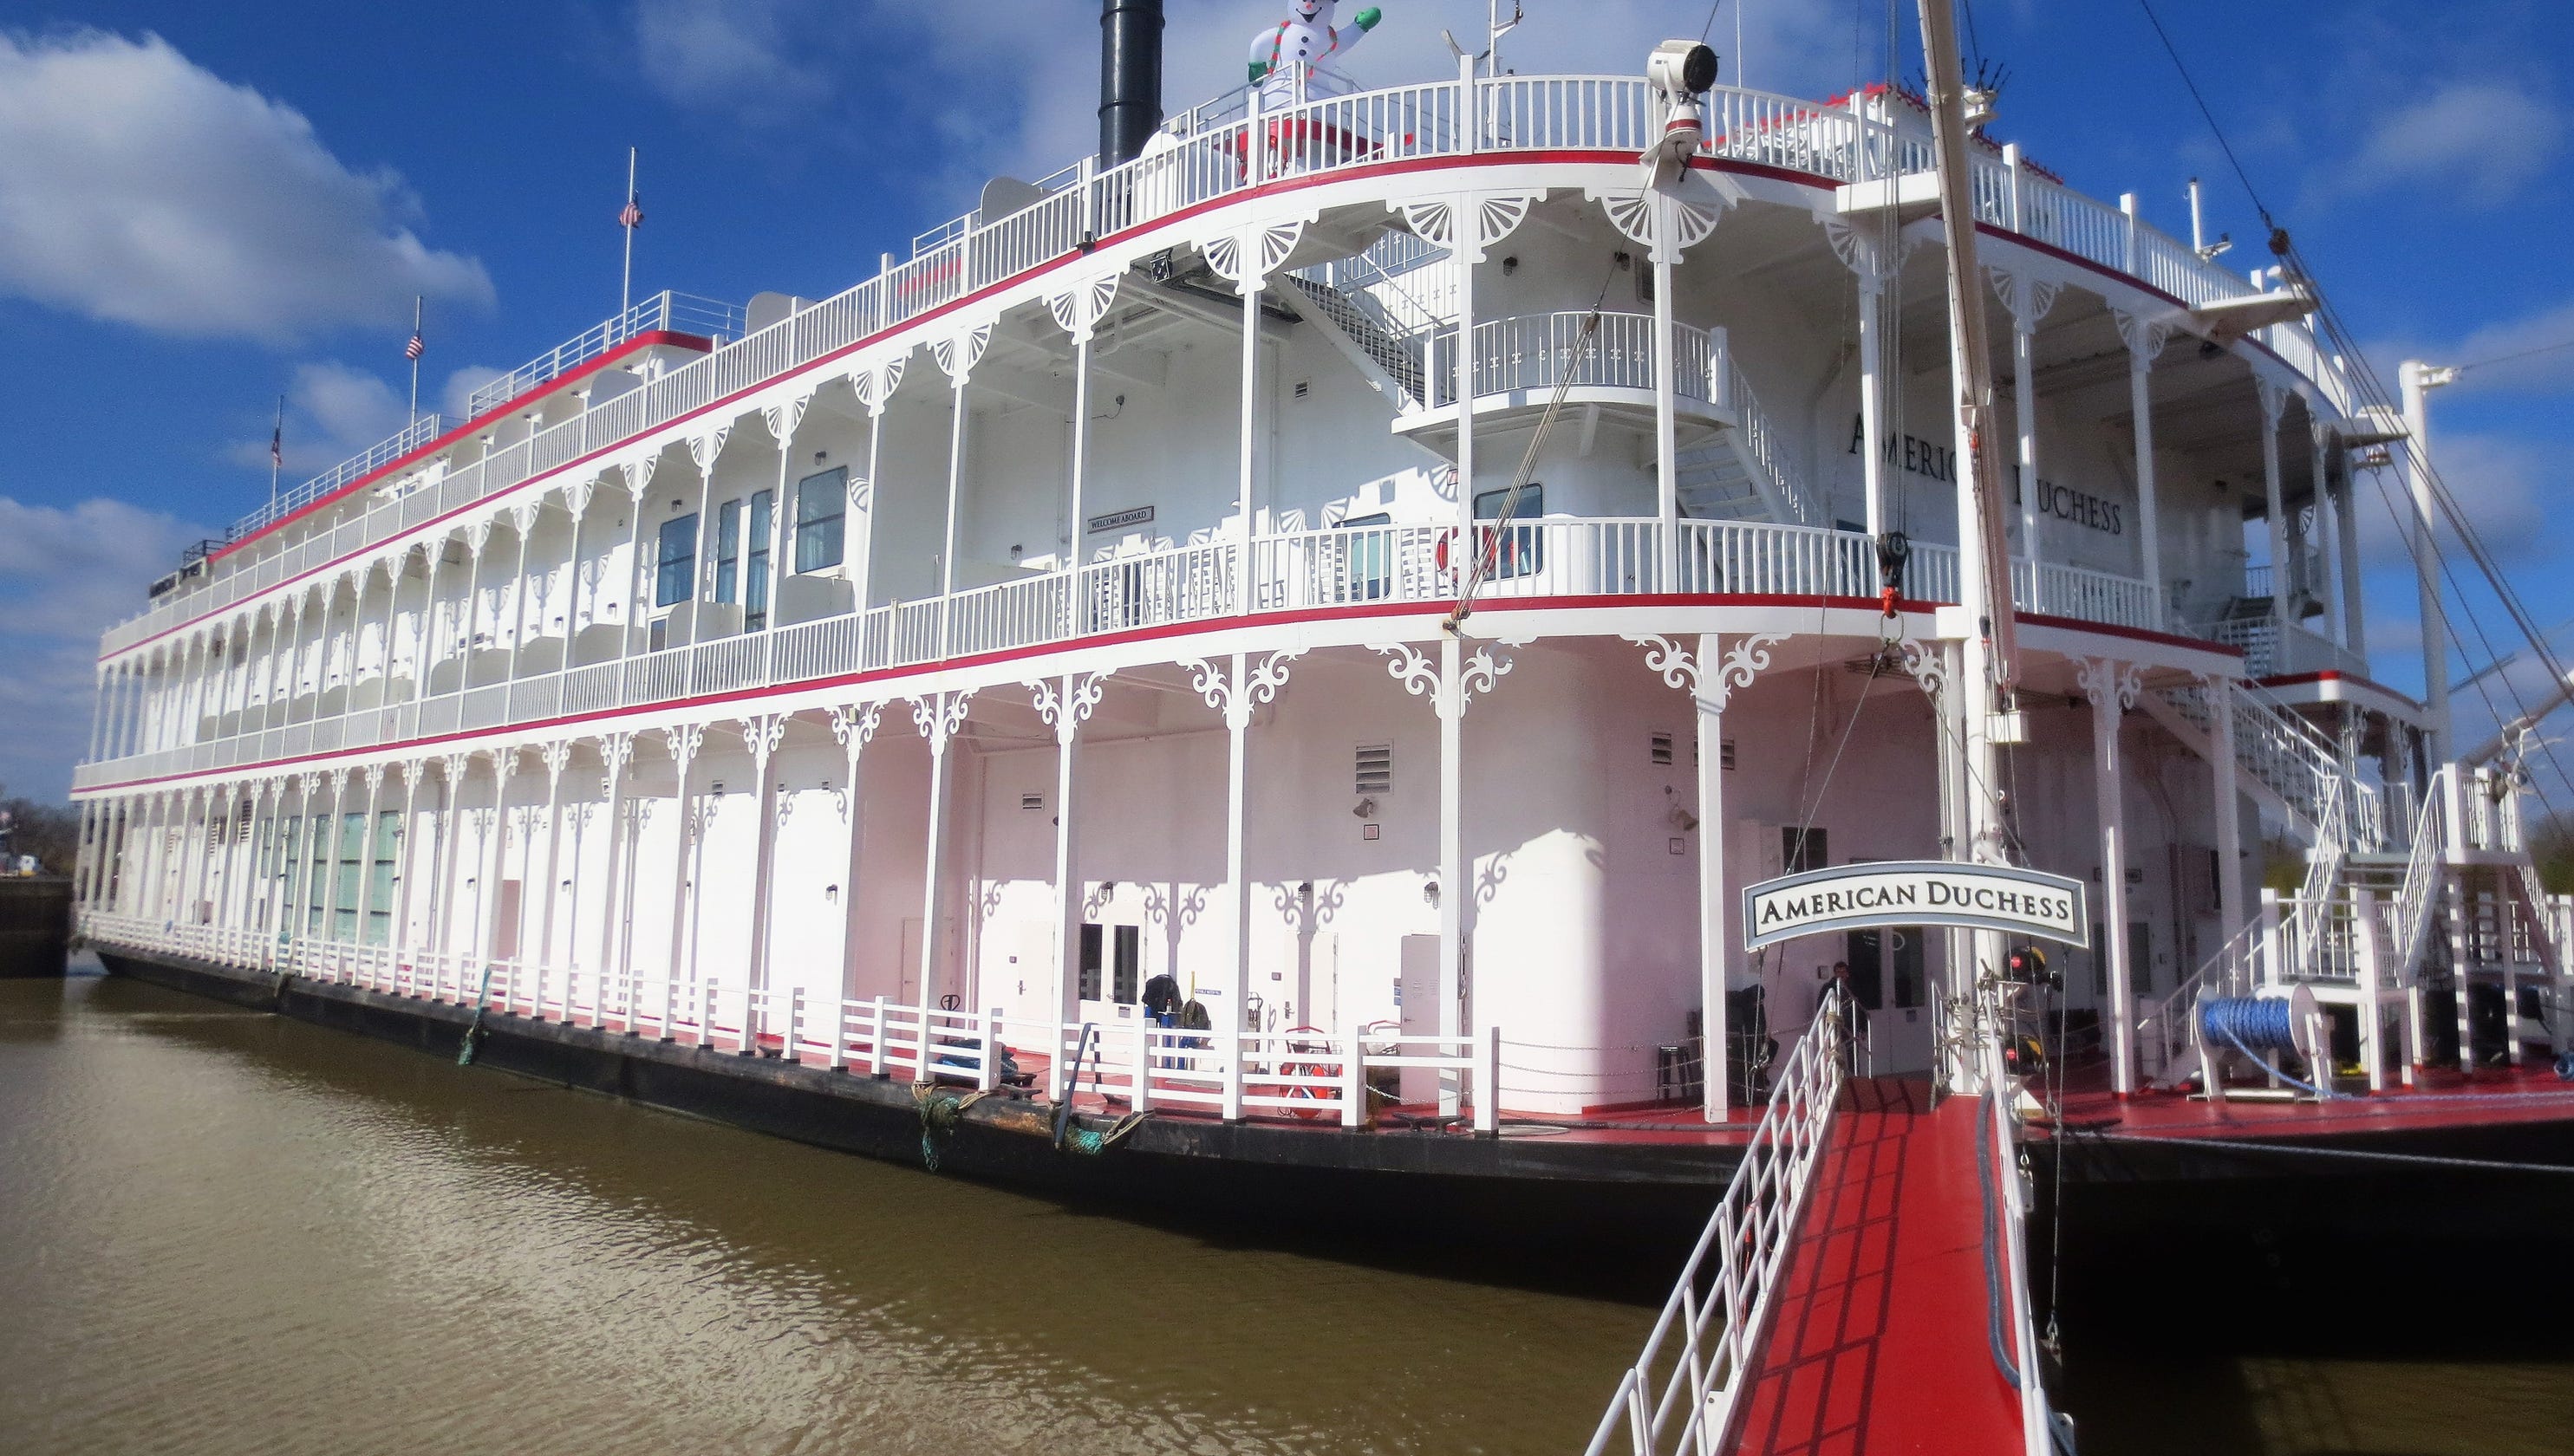 mississippi riverboat overnight cruises